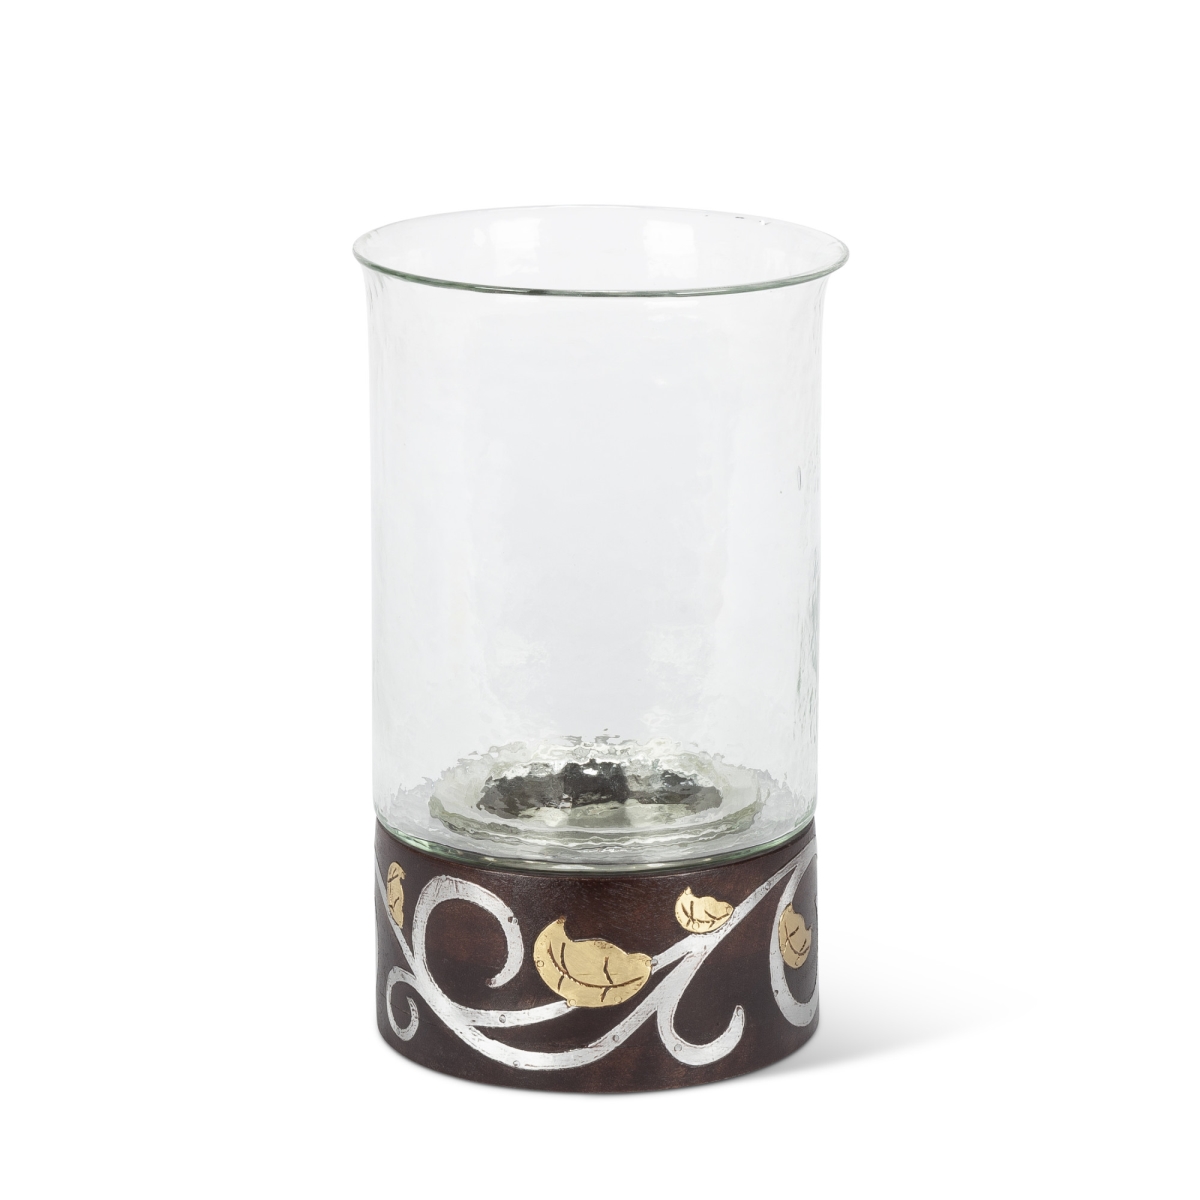 Gerson 94752 12 In. Hand-crafted Gold Leaf Mango Wood Inlay Candleholder - Black